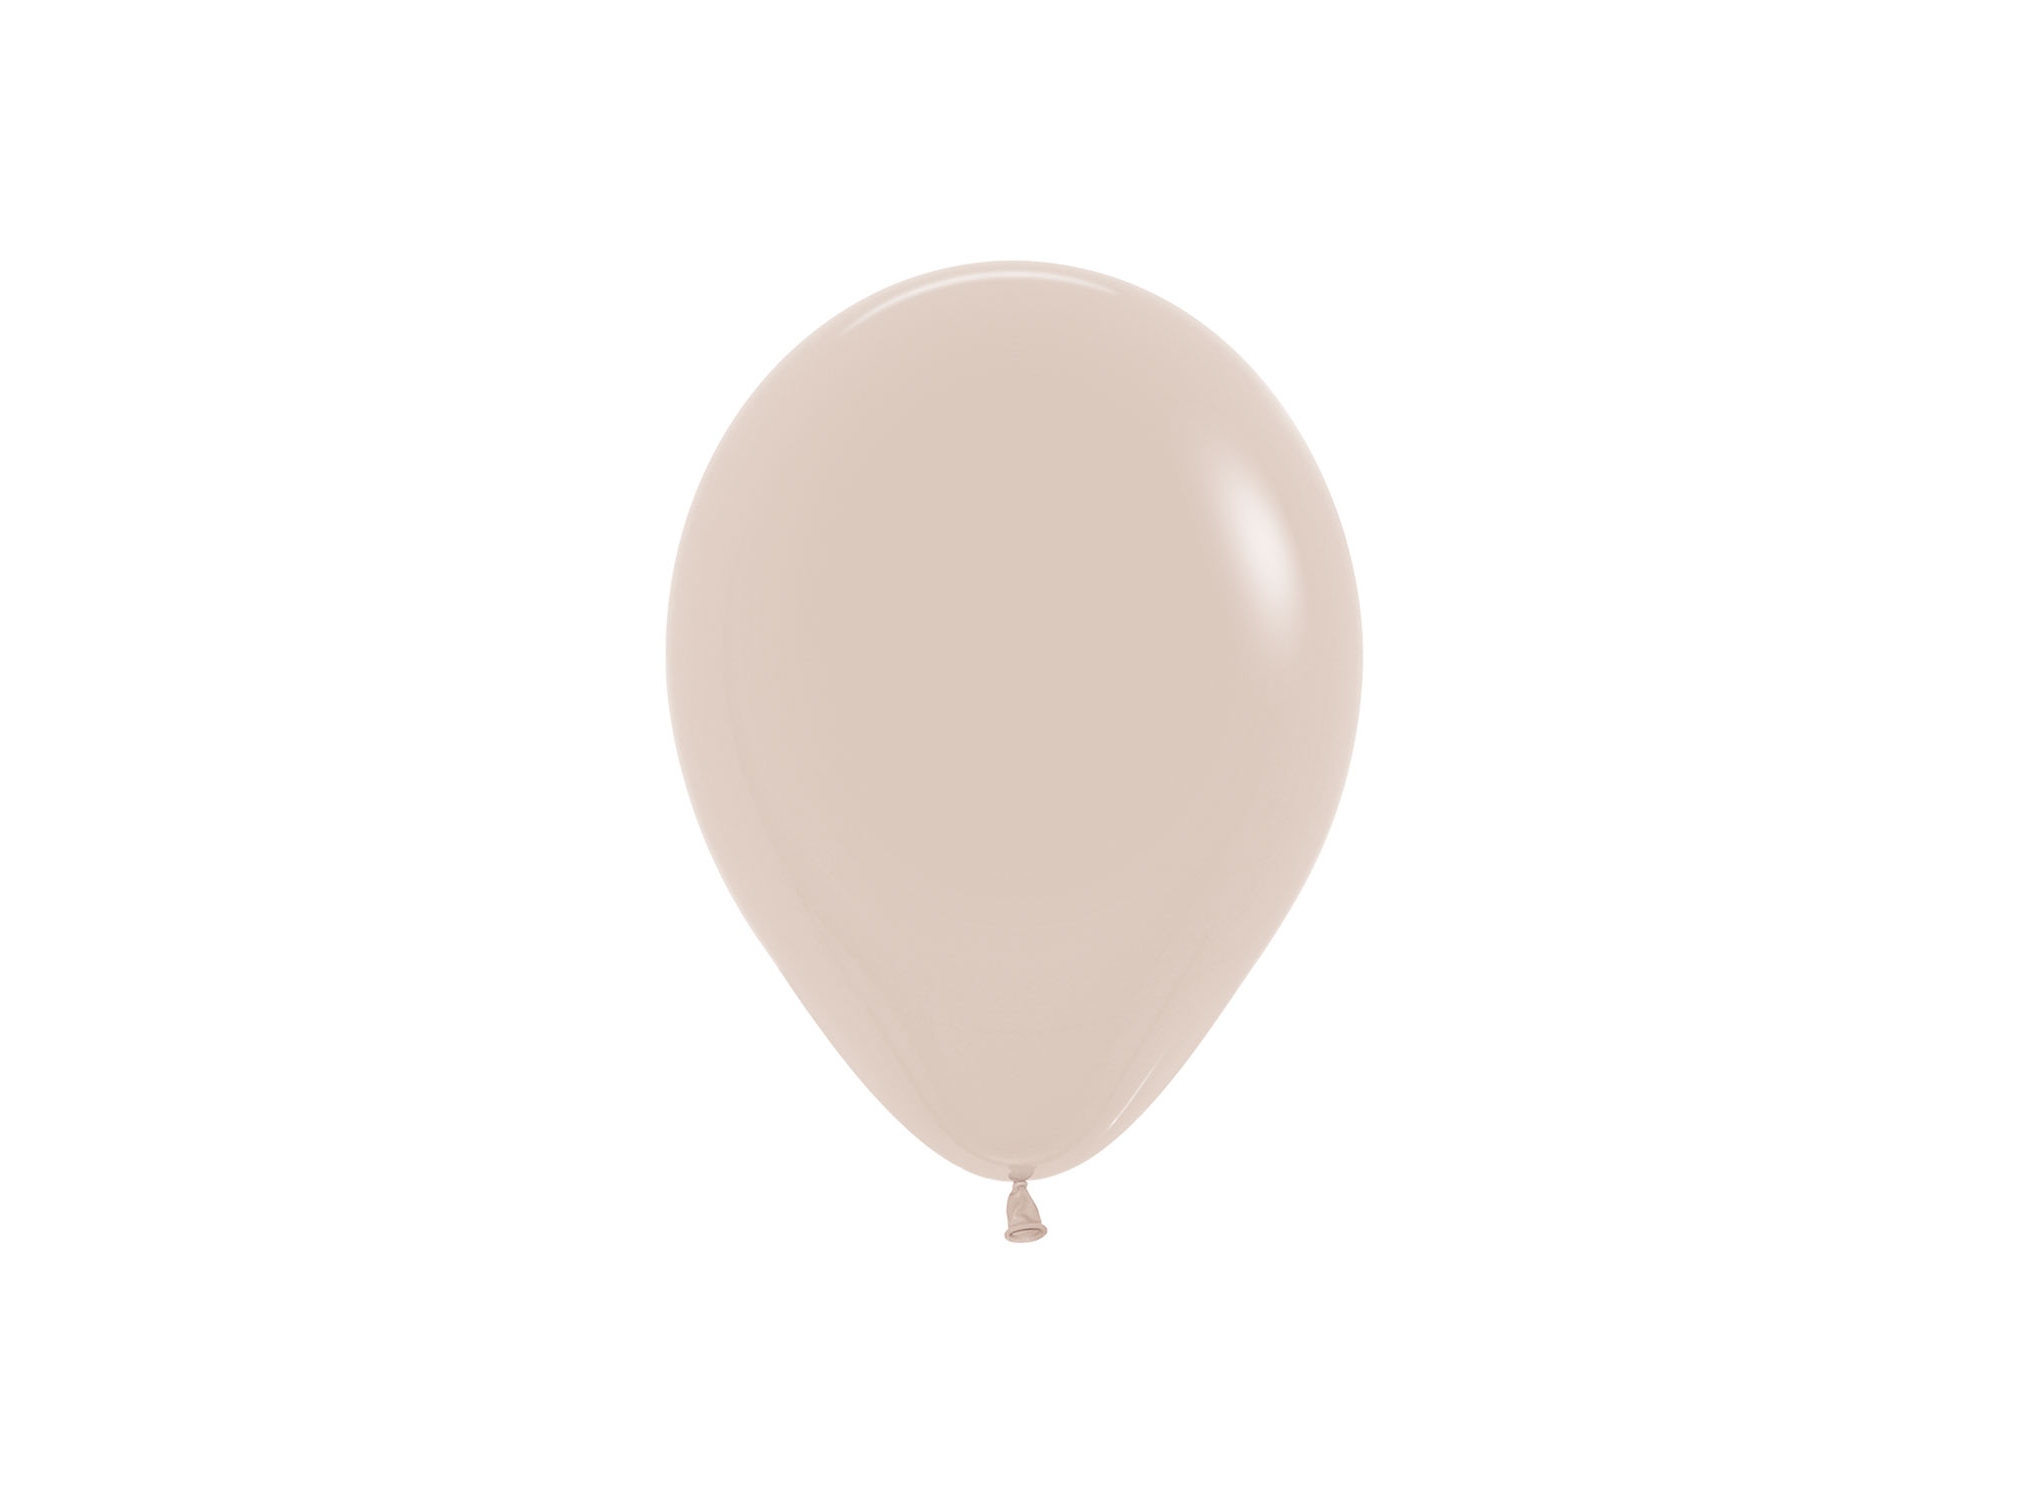 Sempertex White Sand Latex Balloons Birthday Party 5 and 24 inch